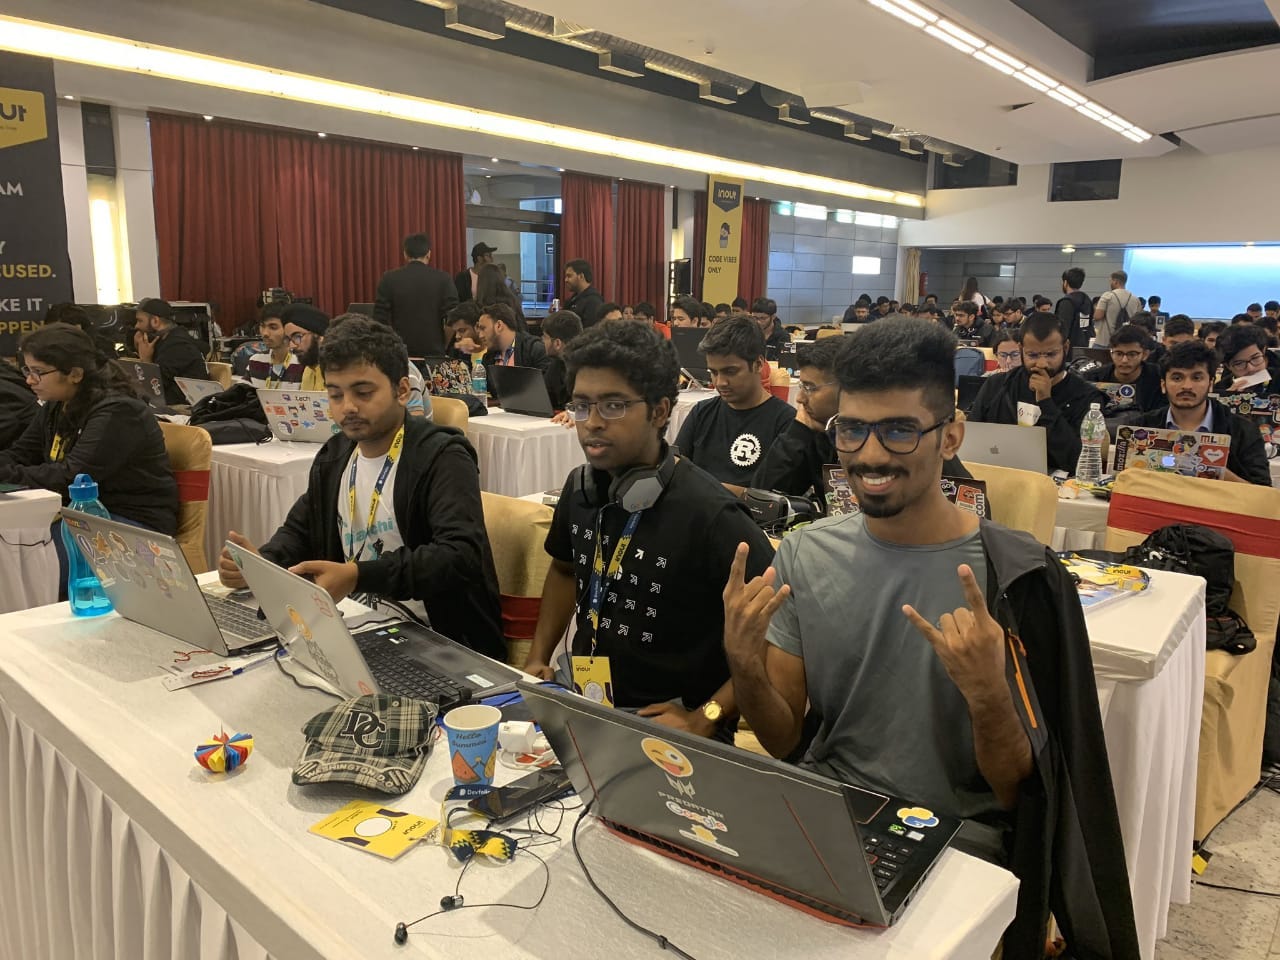 Team — Monks_from_the_south : Ashutosh (IIT, Bombay) (left), Joel (center) and Adarsh S (right)